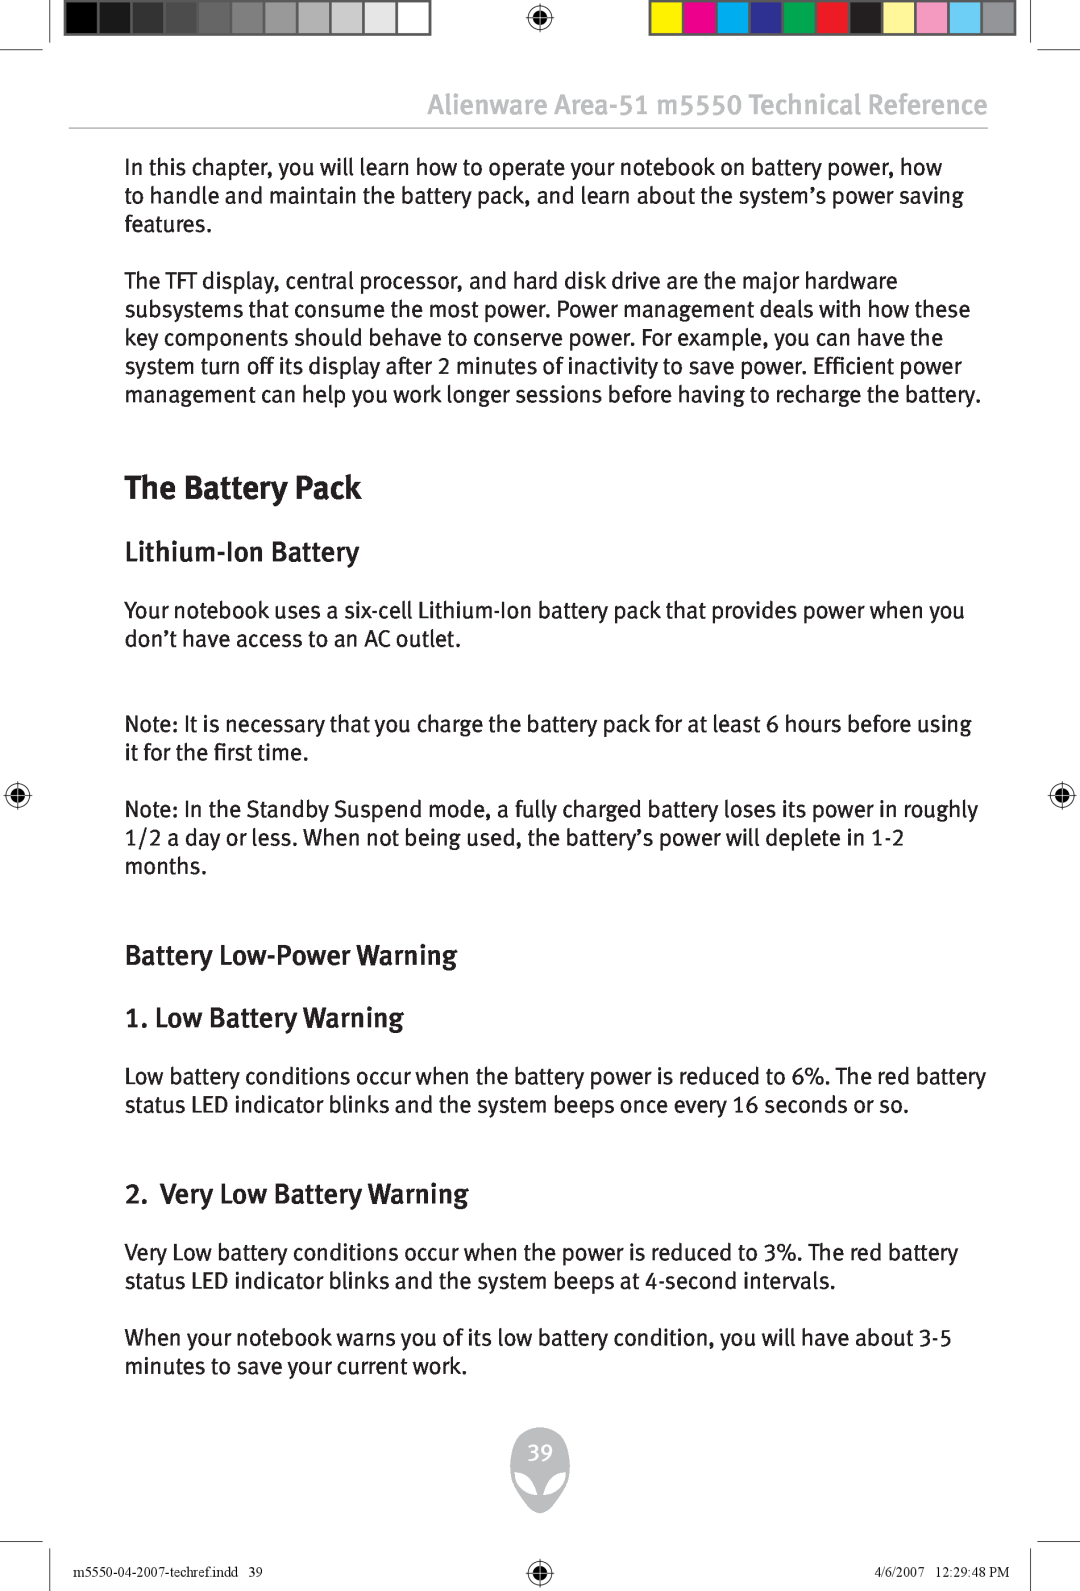 Alienware m5550 user manual The Battery Pack, Lithium-Ion Battery, Battery Low-Power Warning 1. Low Battery Warning 